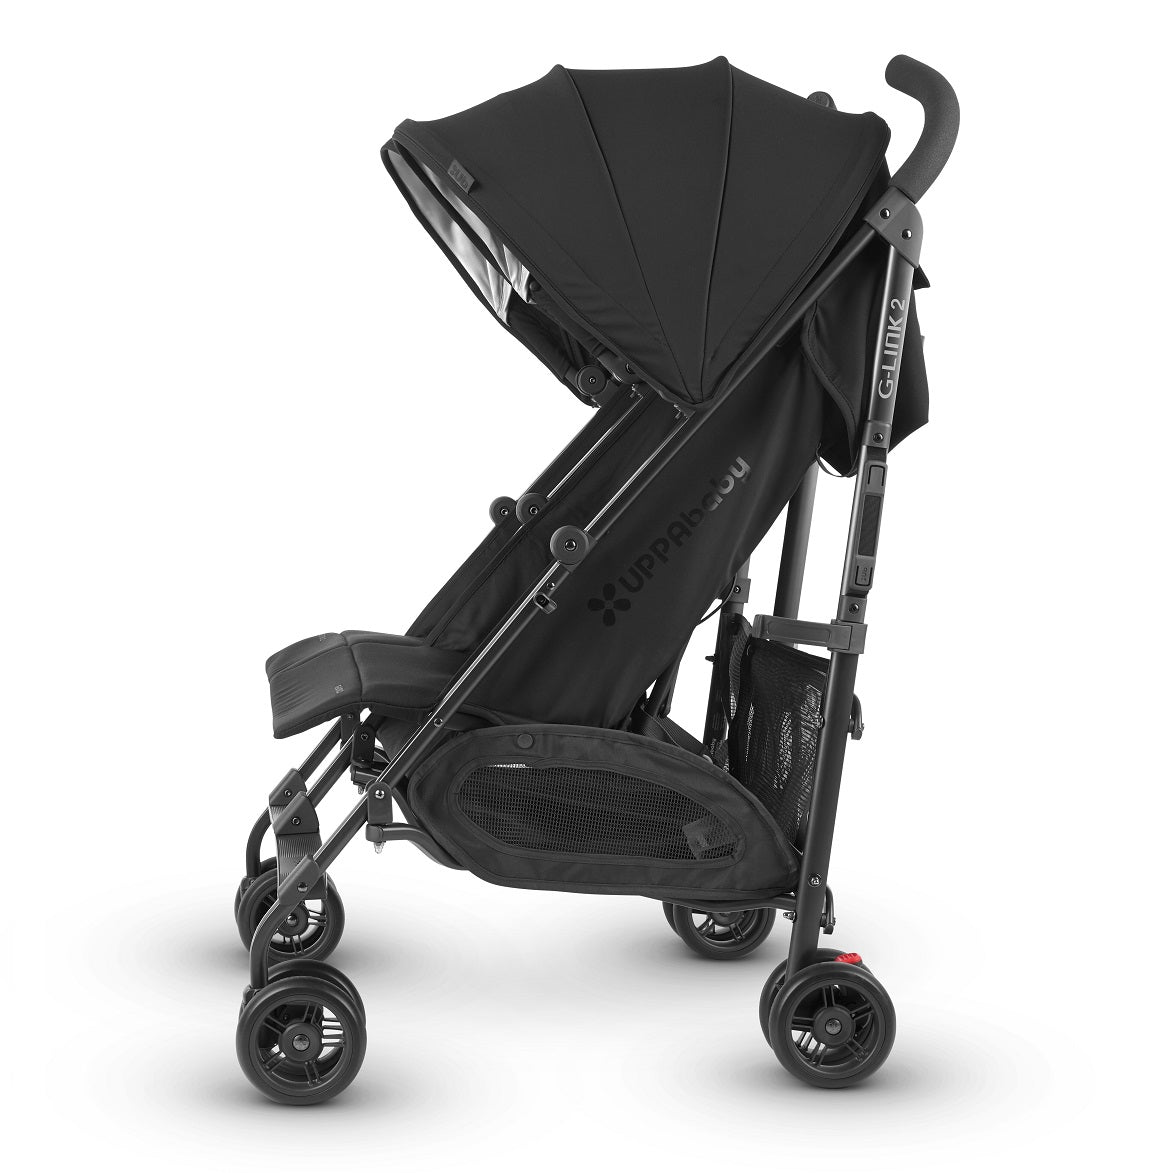 uppababy double stroller glink